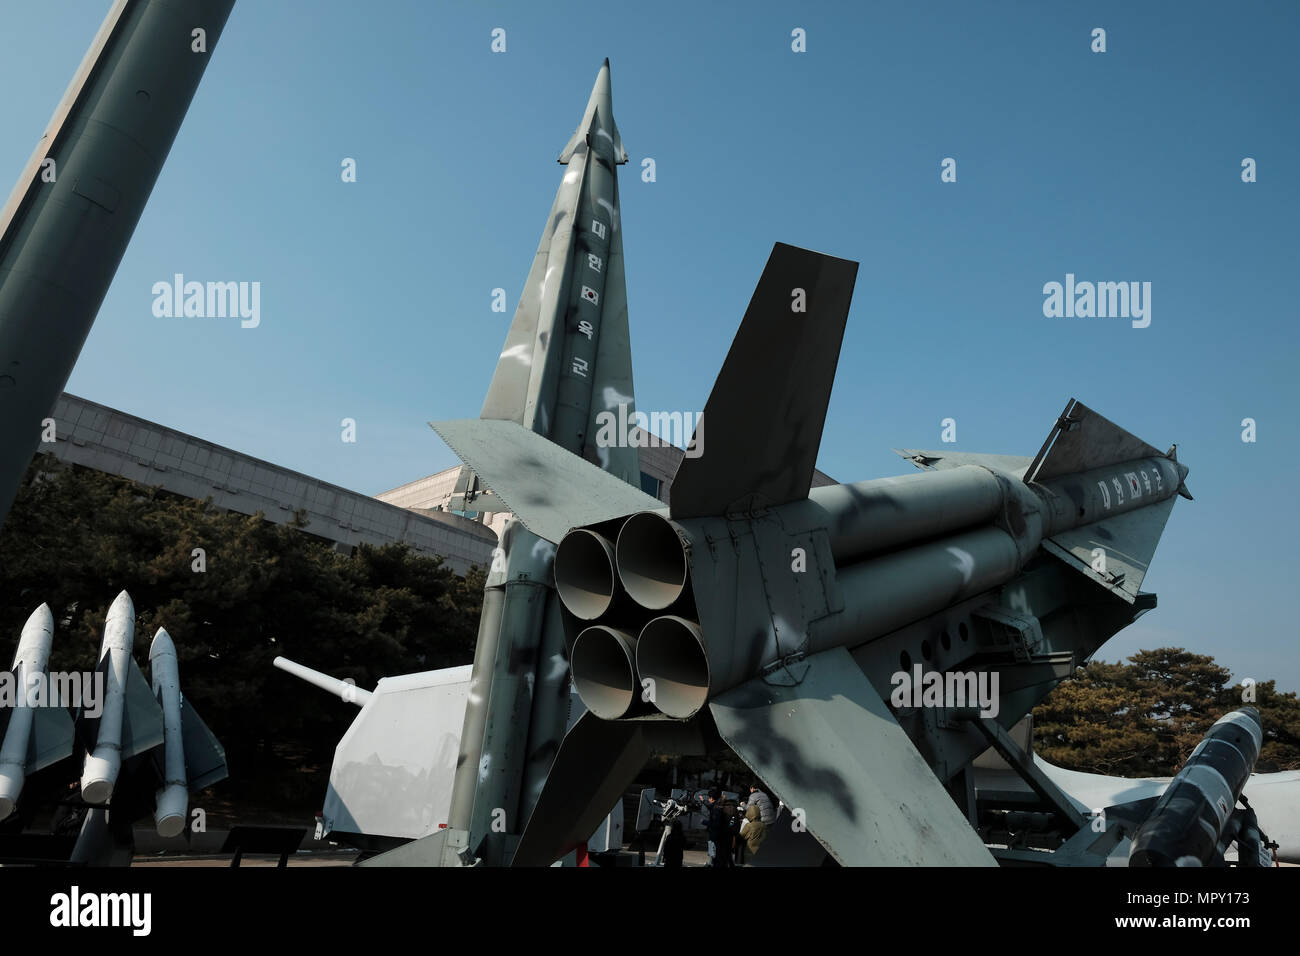 Replicas of South Korean Nike missiles displayed at the War Memorial of Korea museum located in Yongsan-gu district on the former site of the army headquarters to exhibit and memorialize the military history of Korea in the city of Seoul capital of South Korea Stock Photo